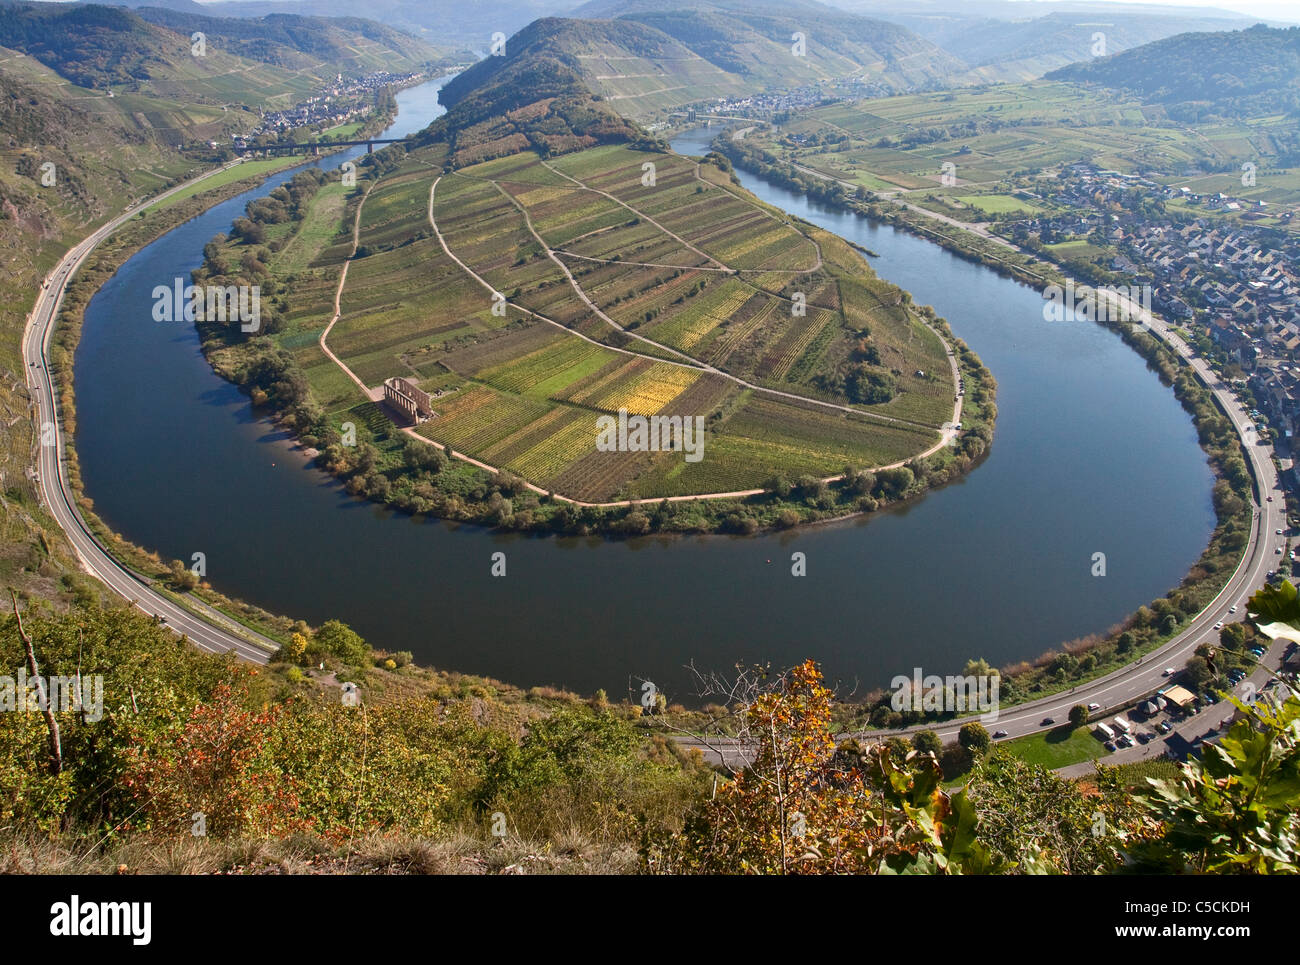 Moselschleife bei Bremm Herbst Mittelmosel, Loop, curve of the Moselle river near the village Bremm autumn fall Stock Photo